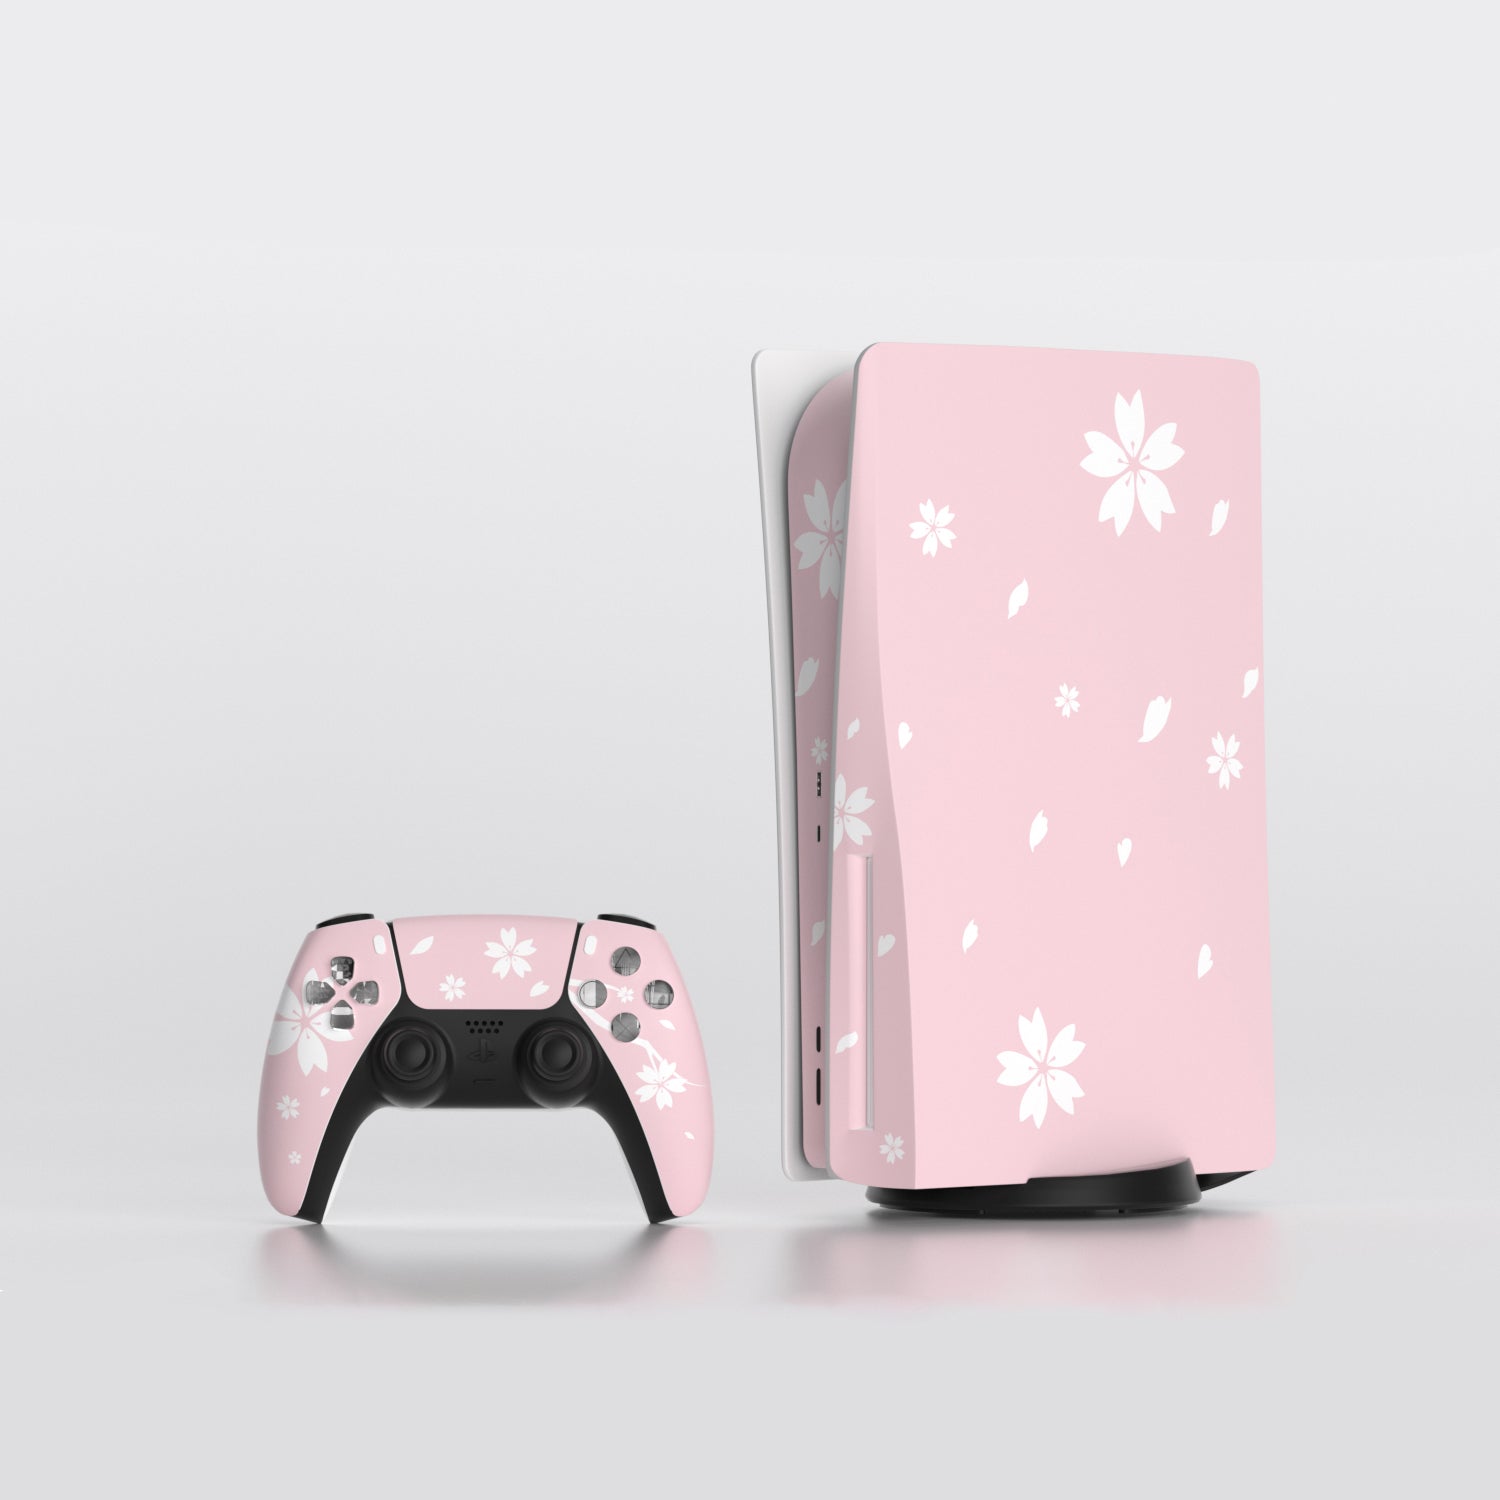 For XBOX 360 controllers case cover Vinyl Decal Skin sticker-Japanese anime